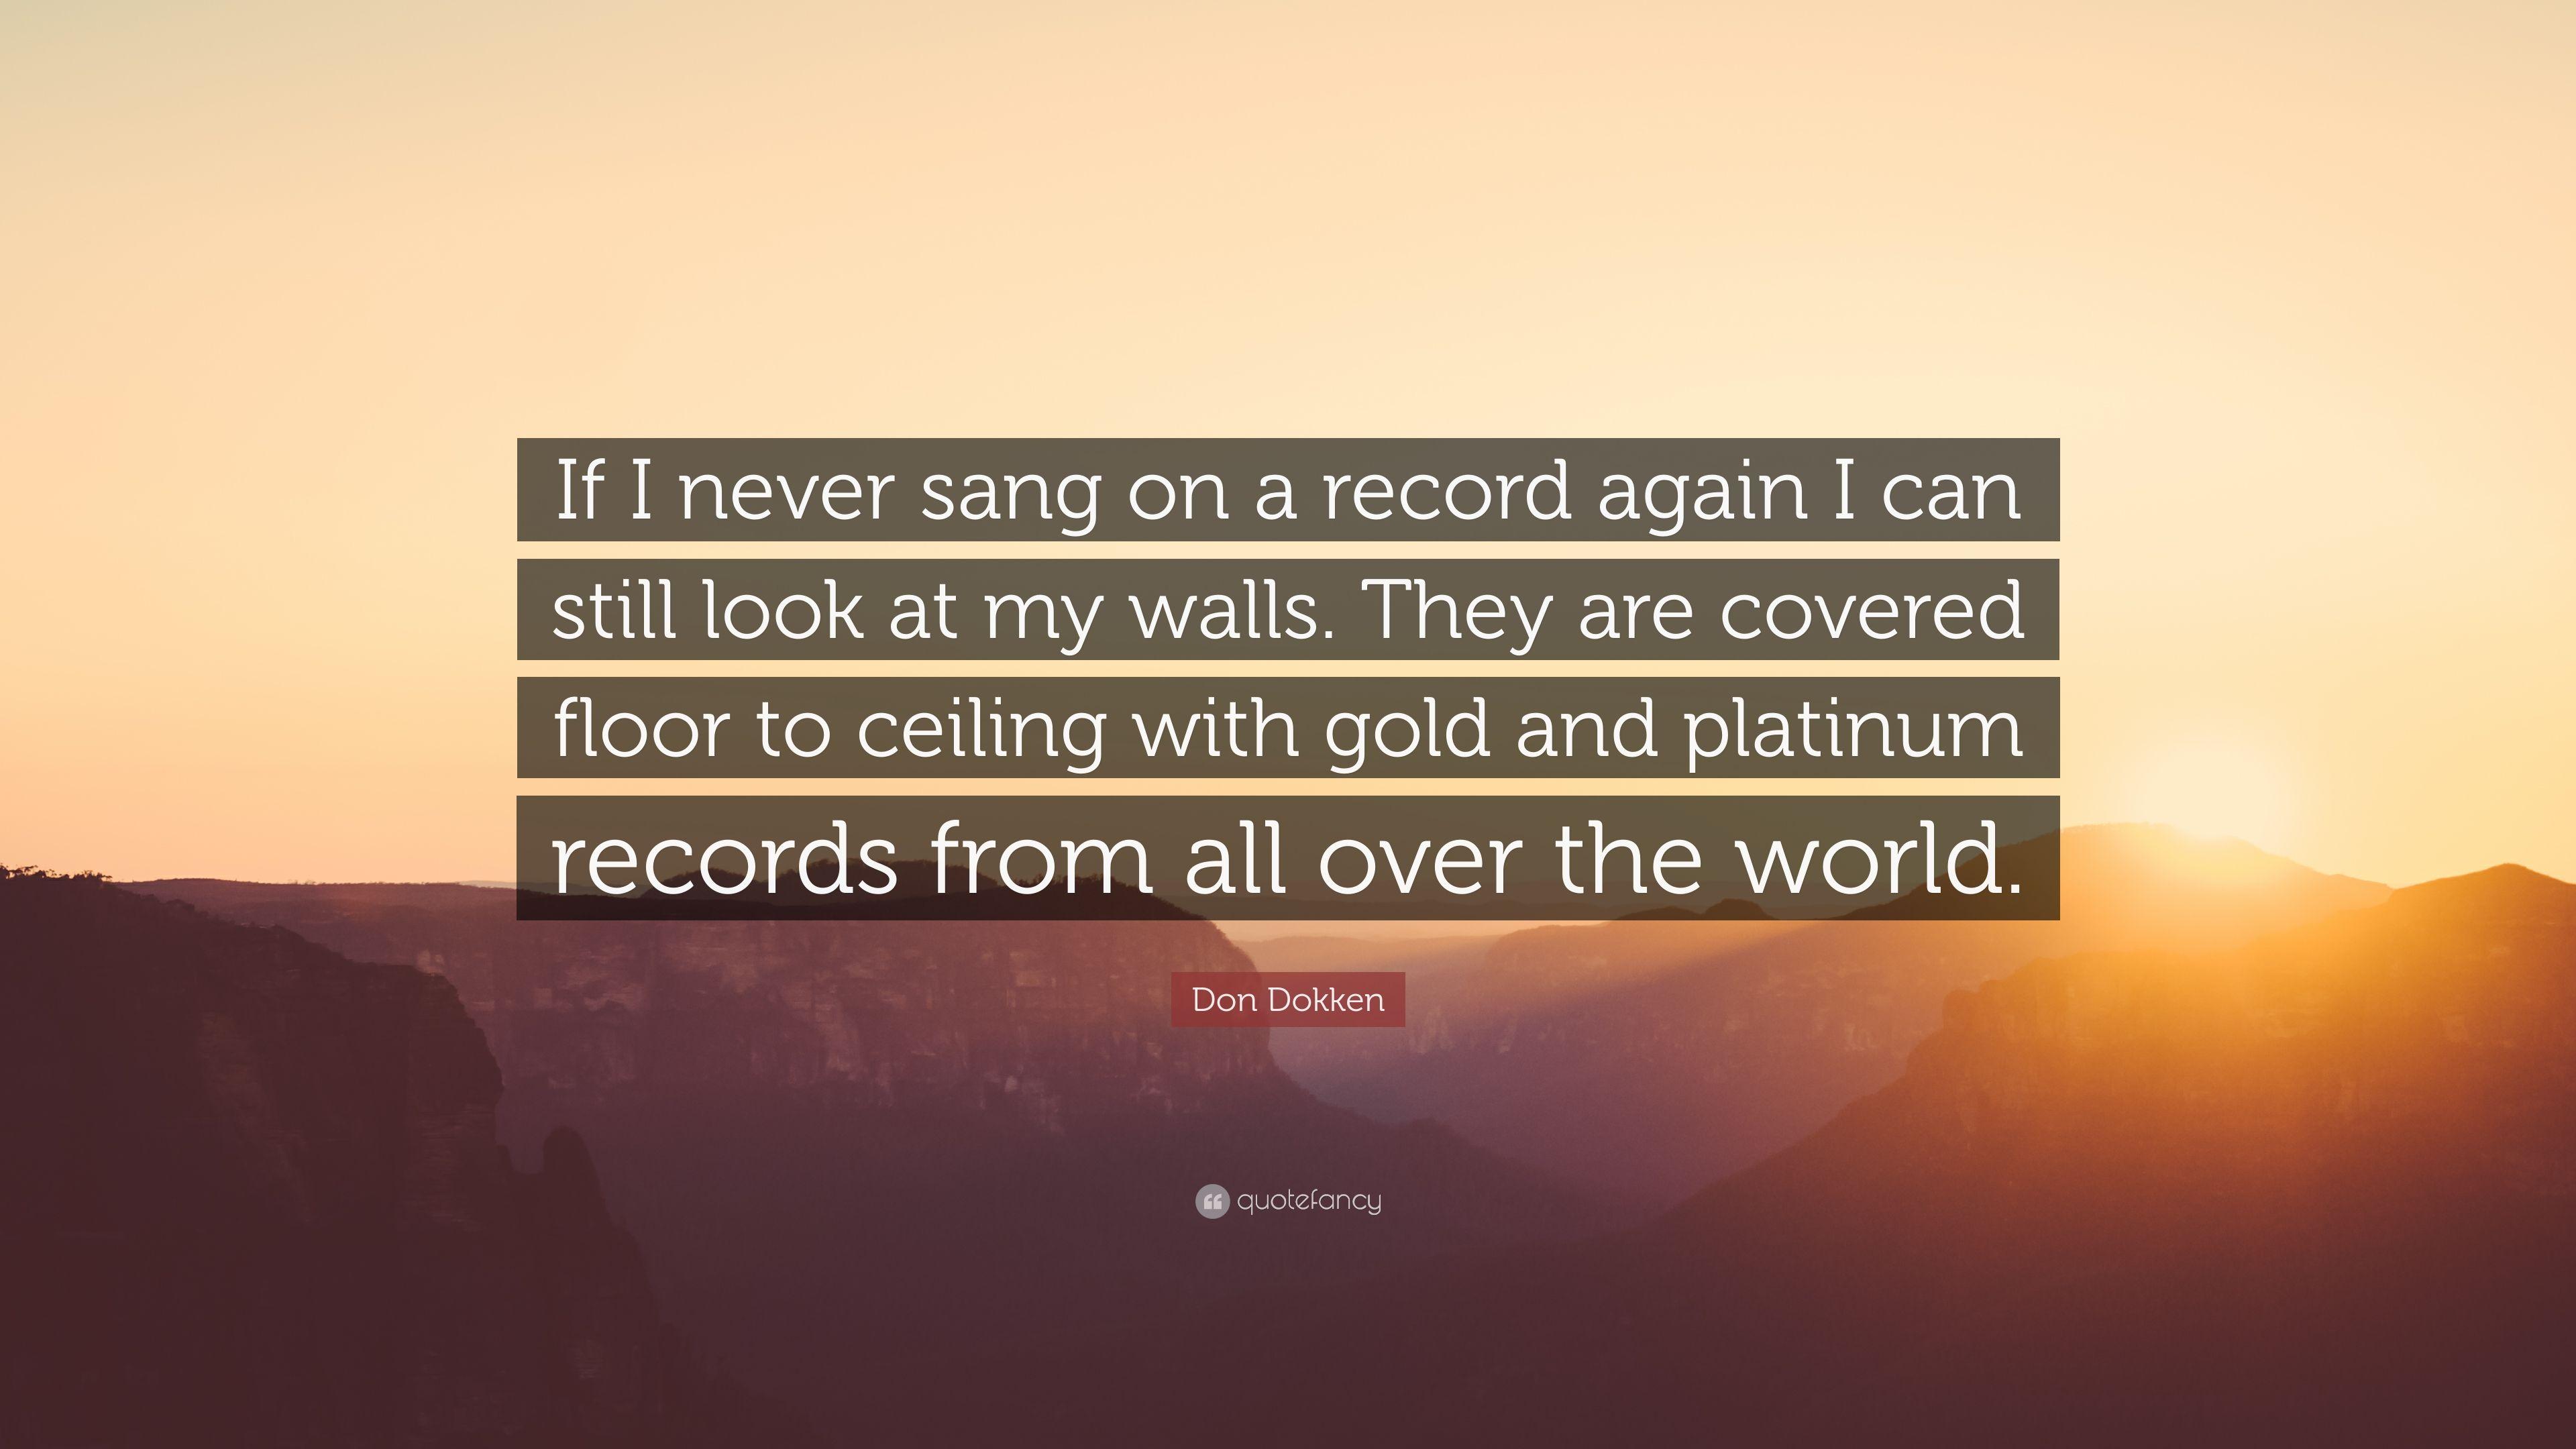 Don Dokken Quote: “If I never sang on a record again I can still